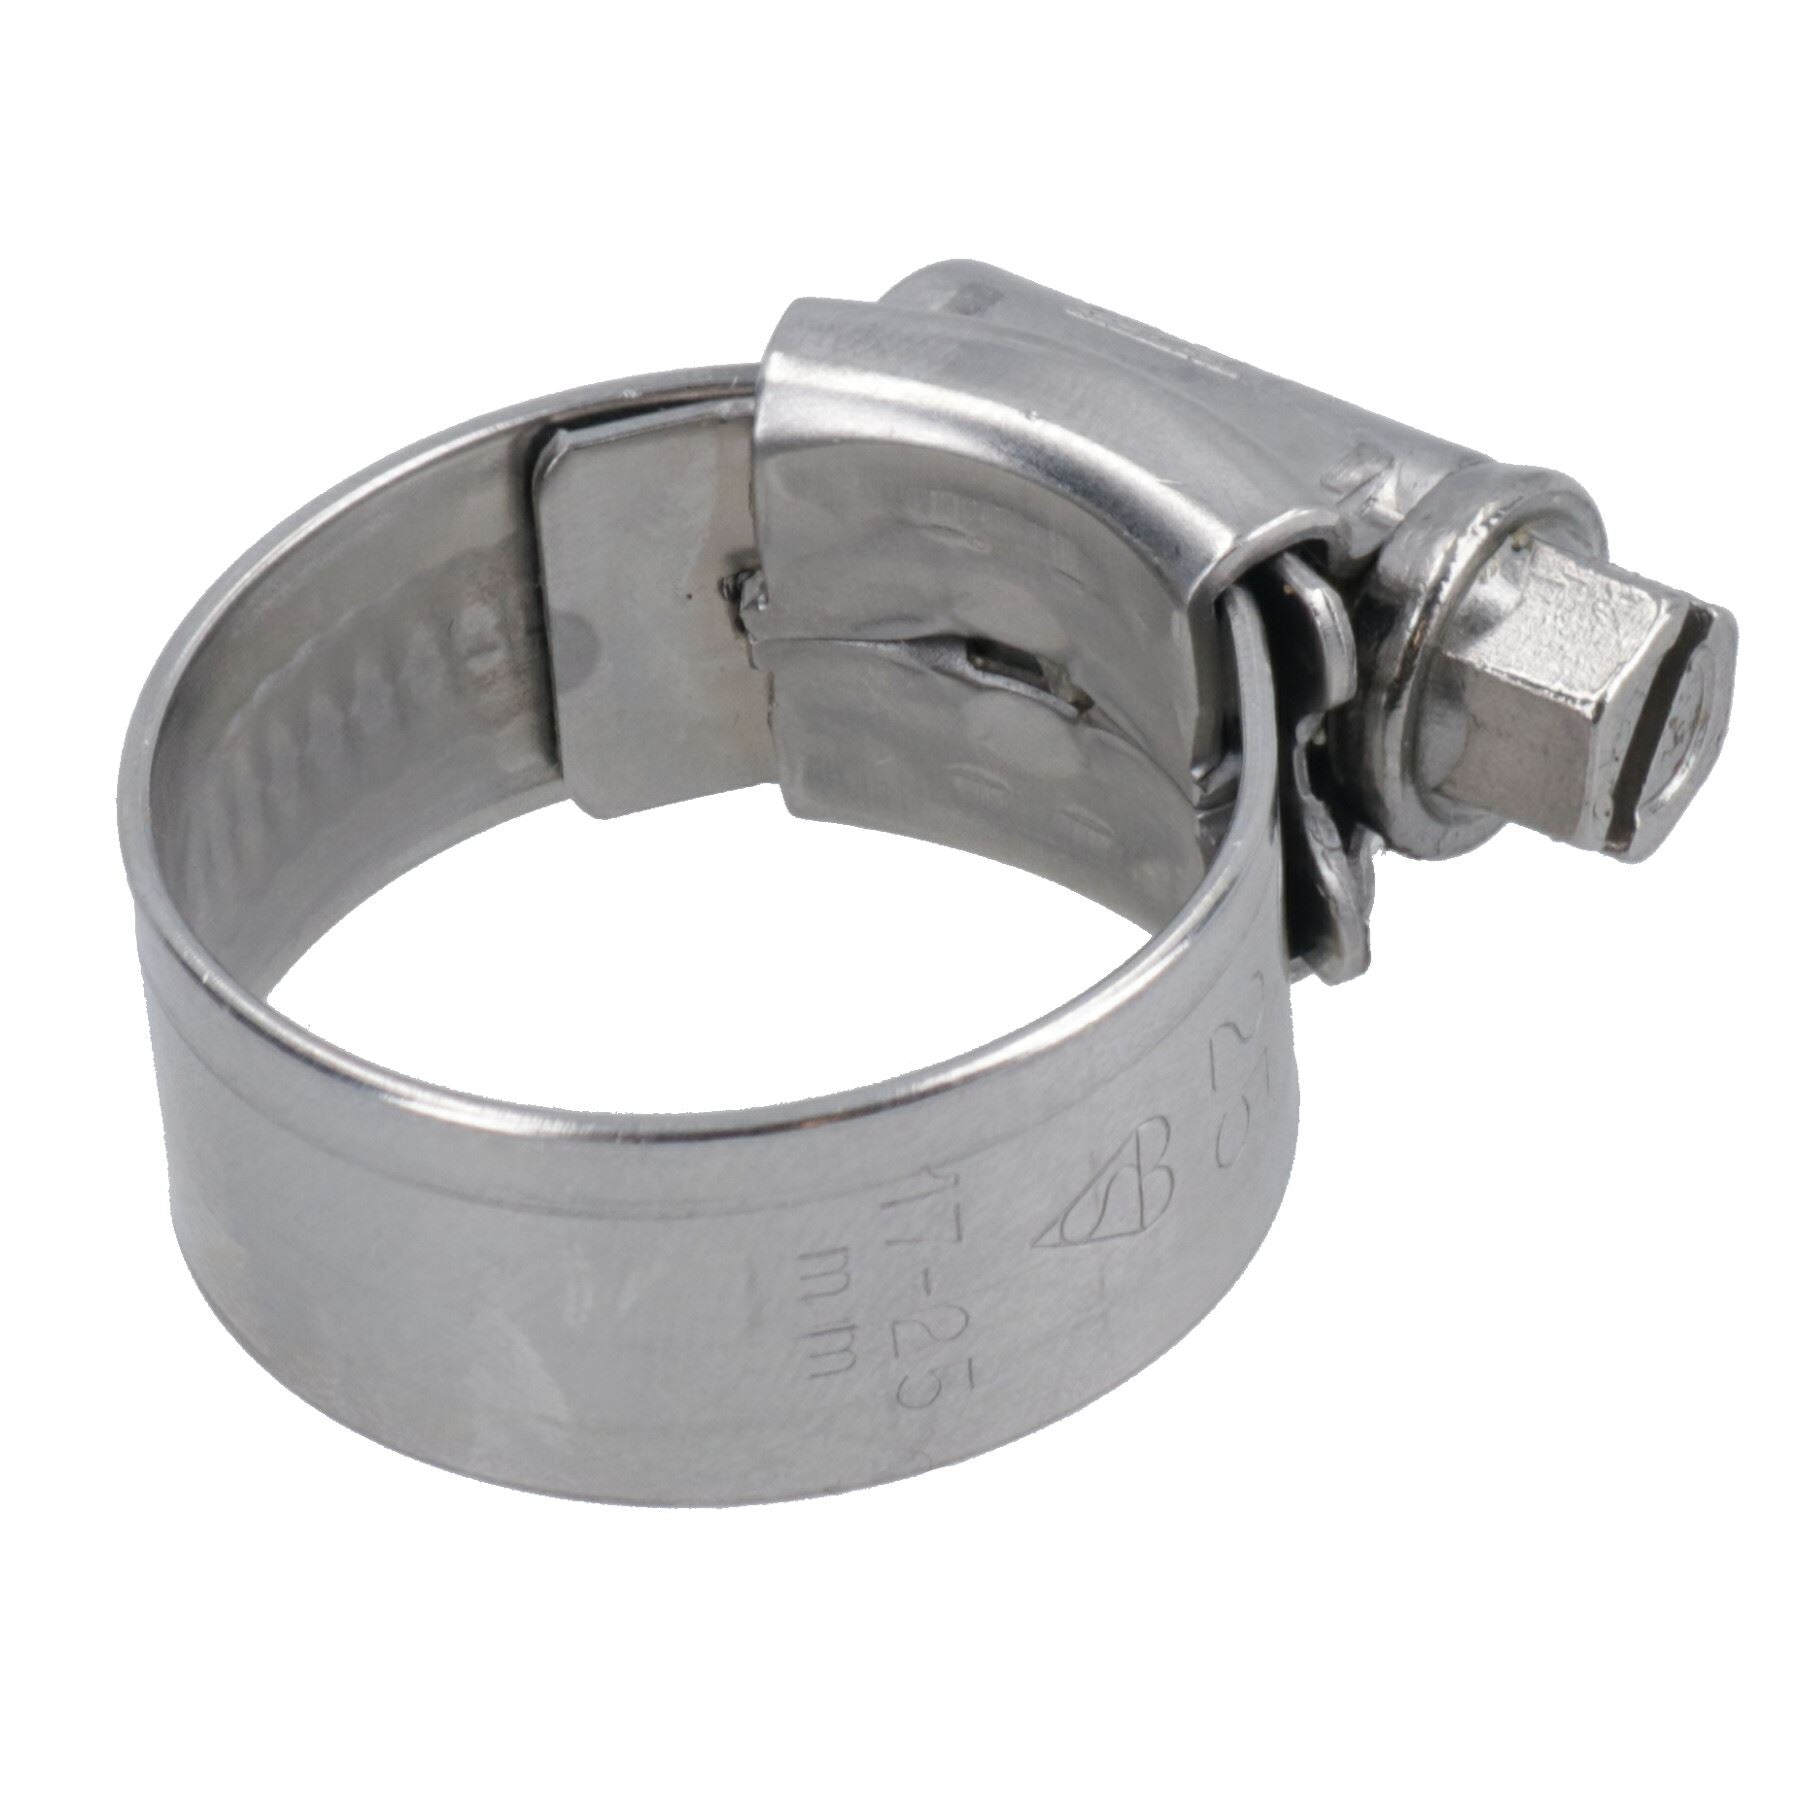 Stainless Steel Jubilee Hose Clamps Clips 17mm- 25mm Marine Lloyds Approved